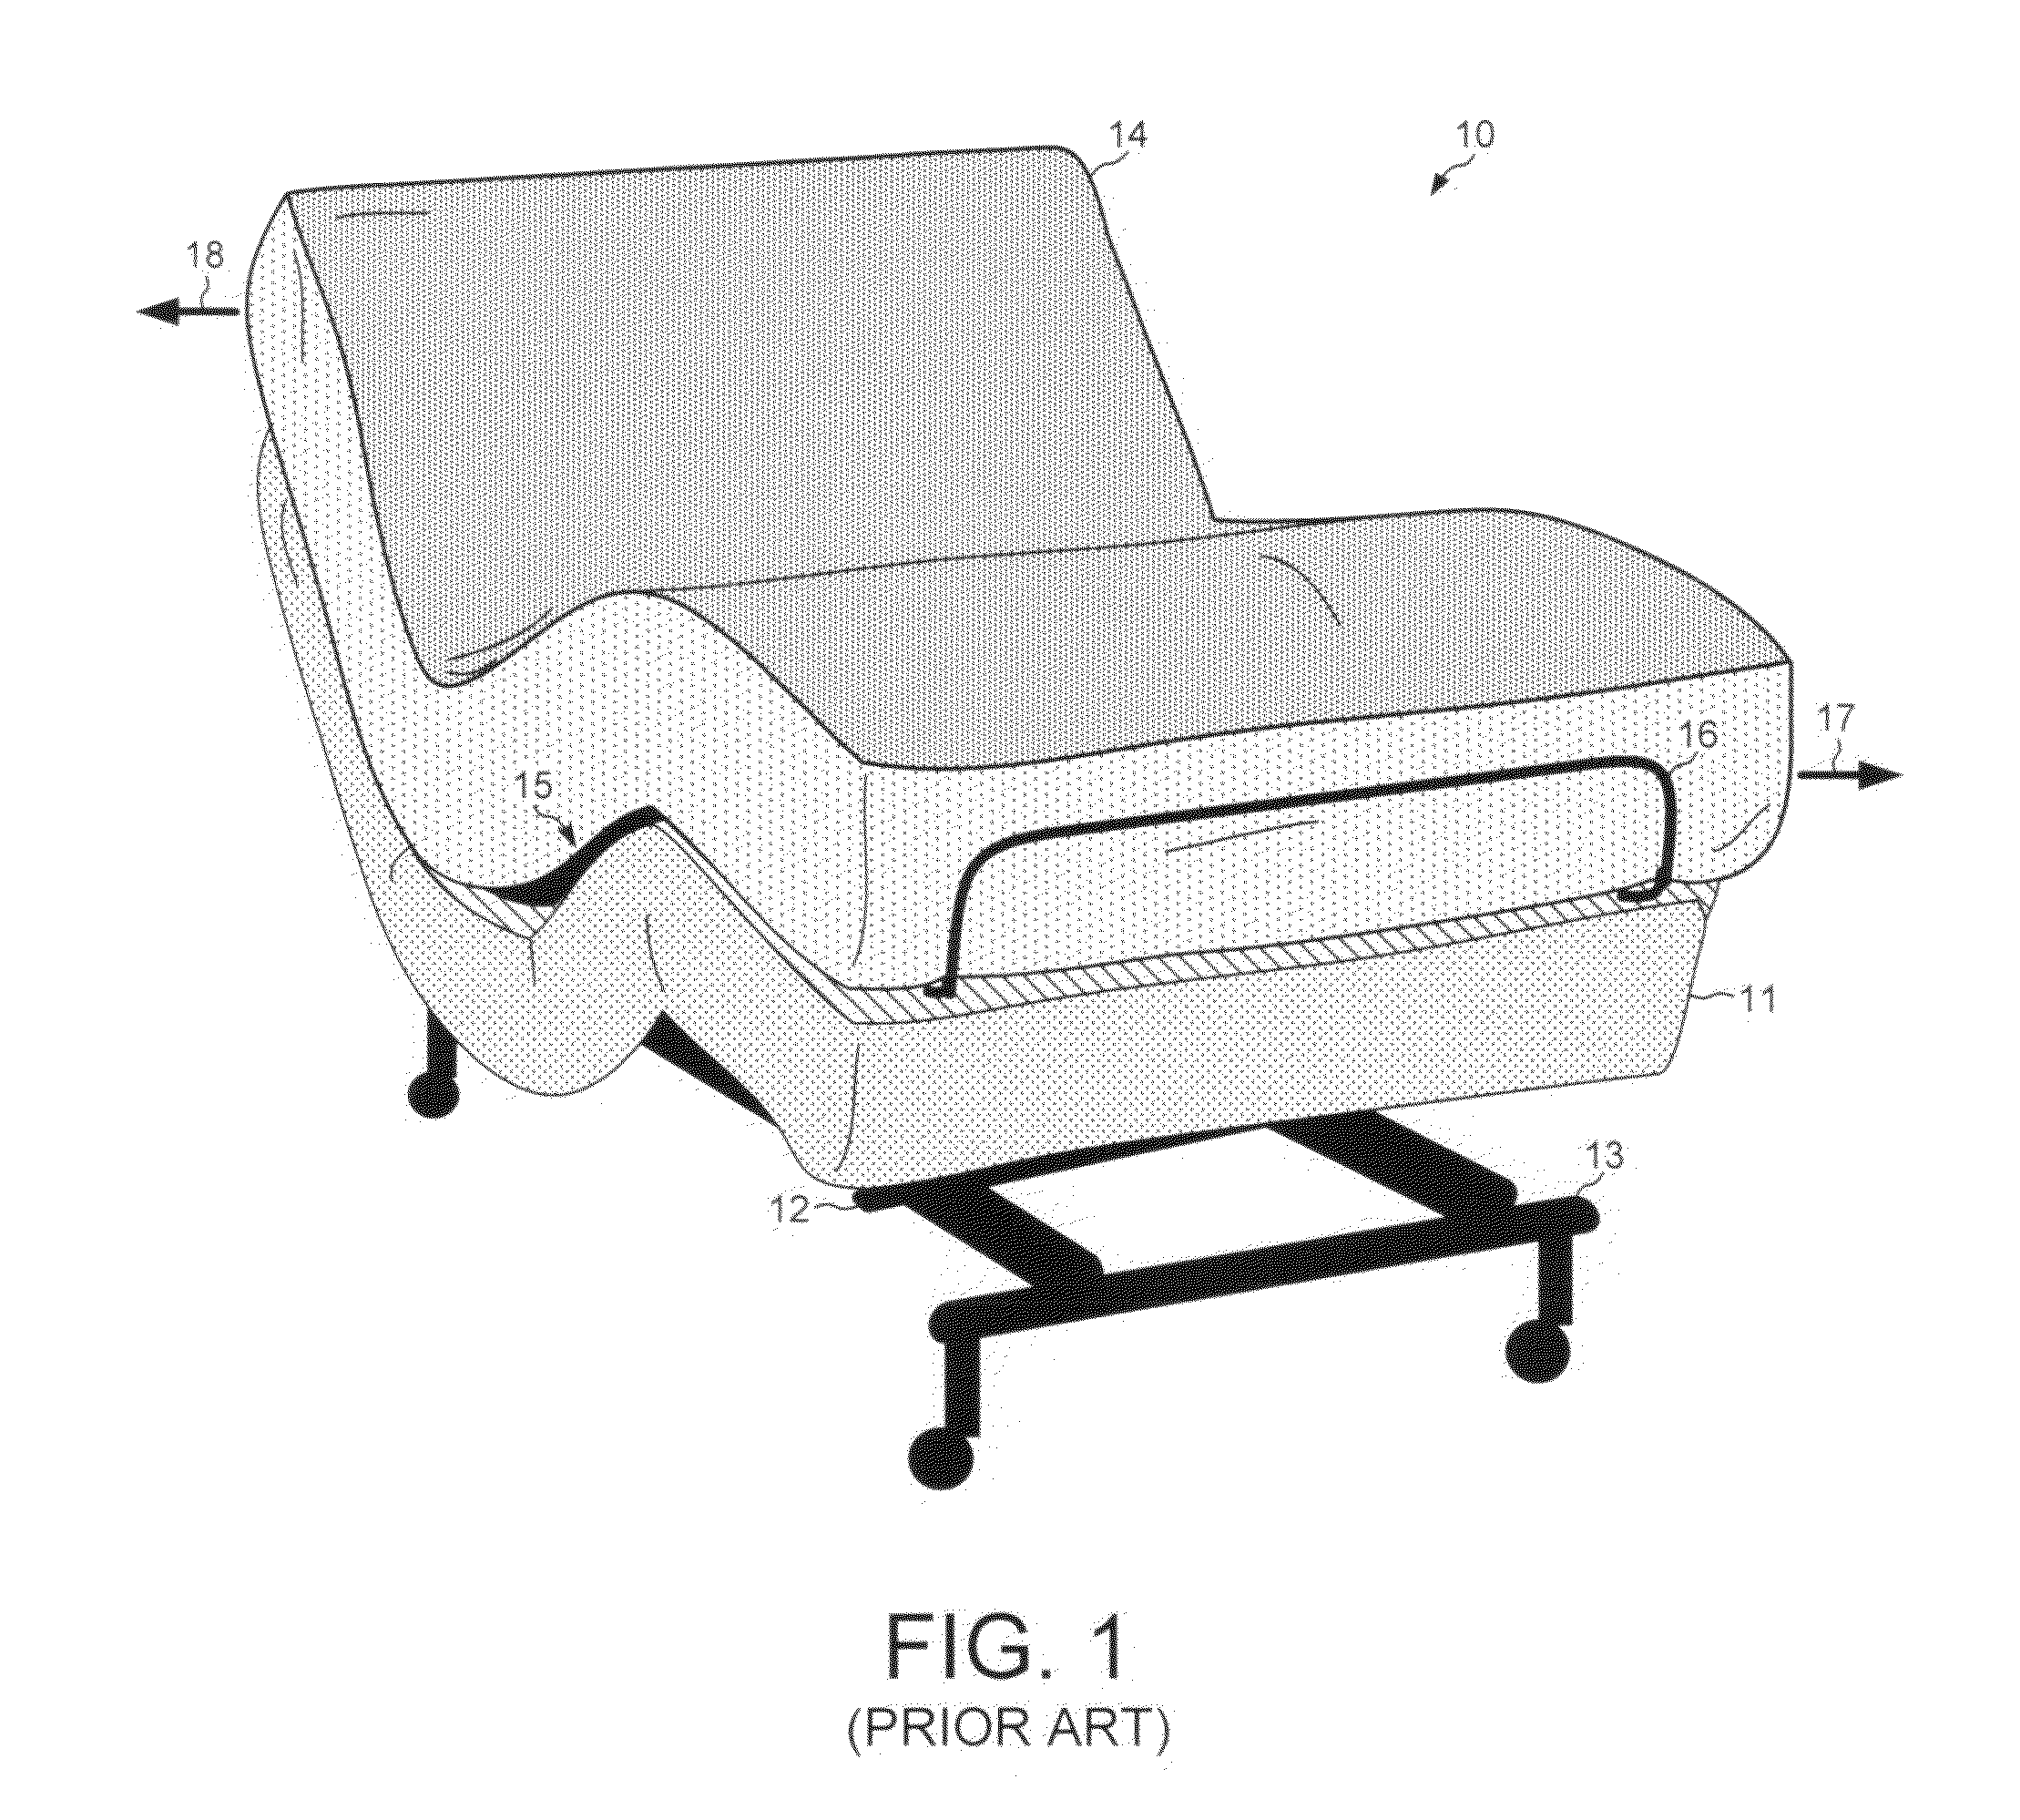 Self-adjusting mattress with balancing bars and an integrated movement mechanism